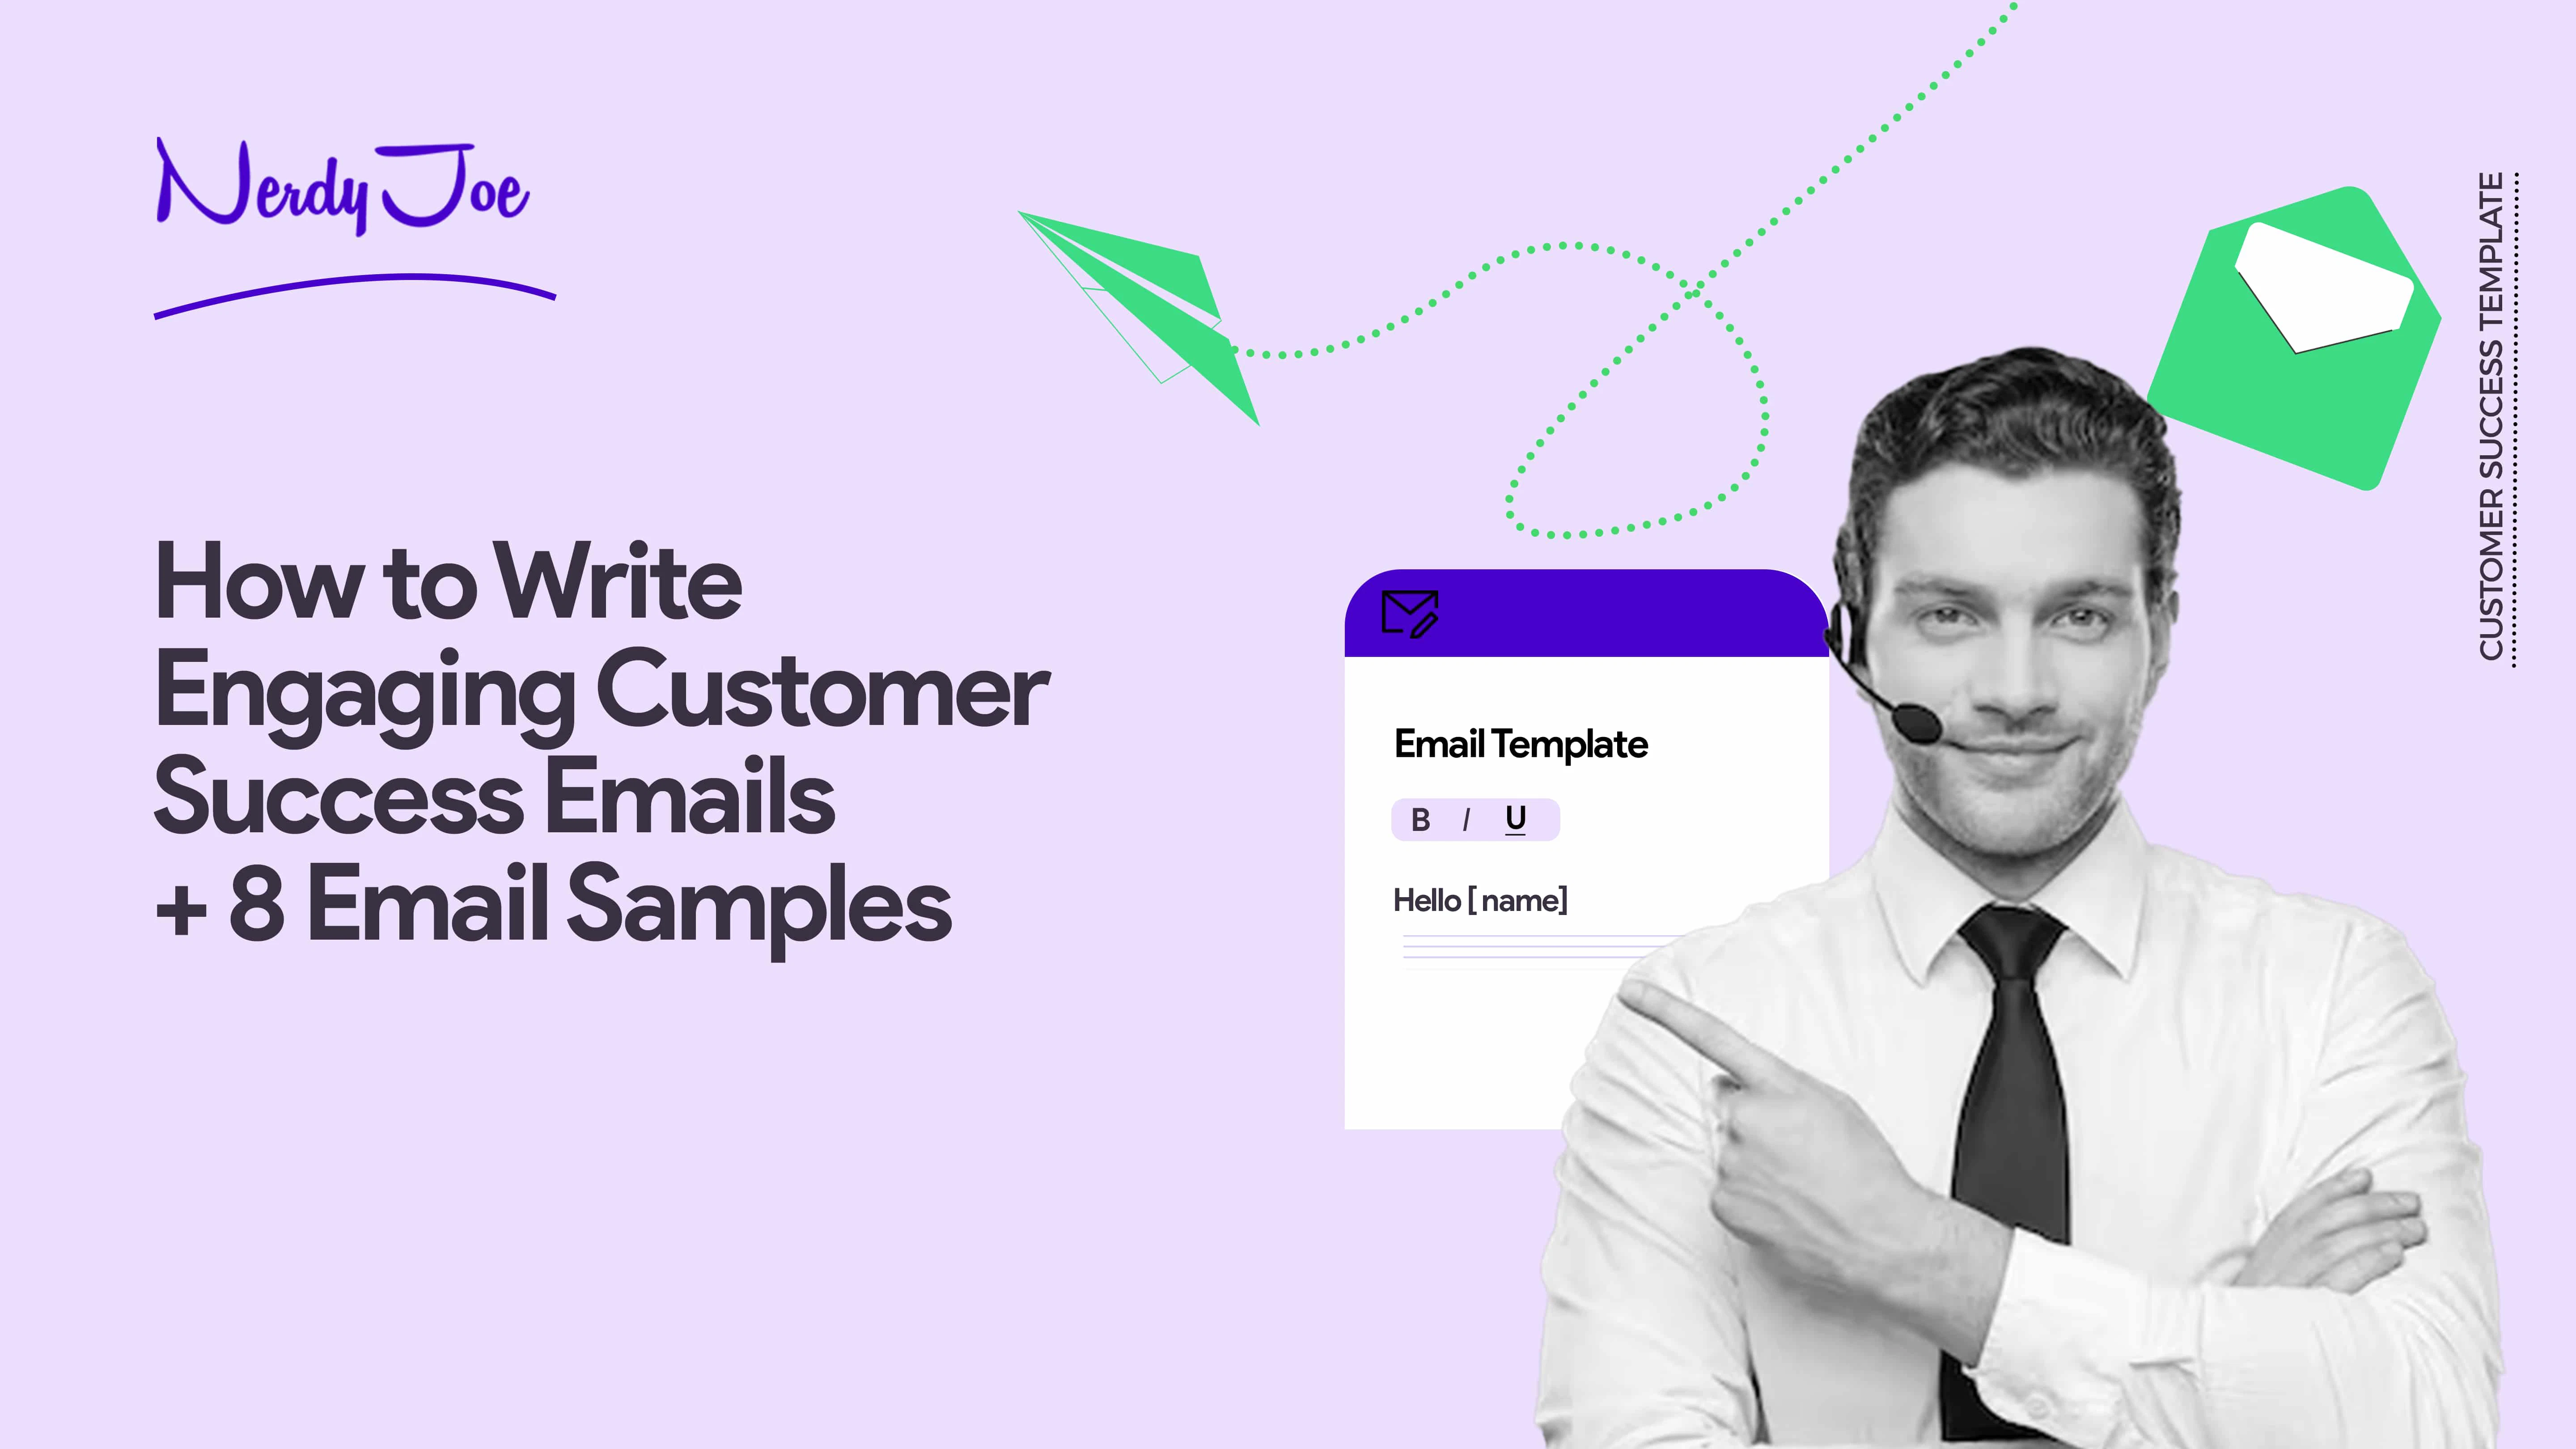 How to Write Engaging Customer Success Emails With 8 Samples